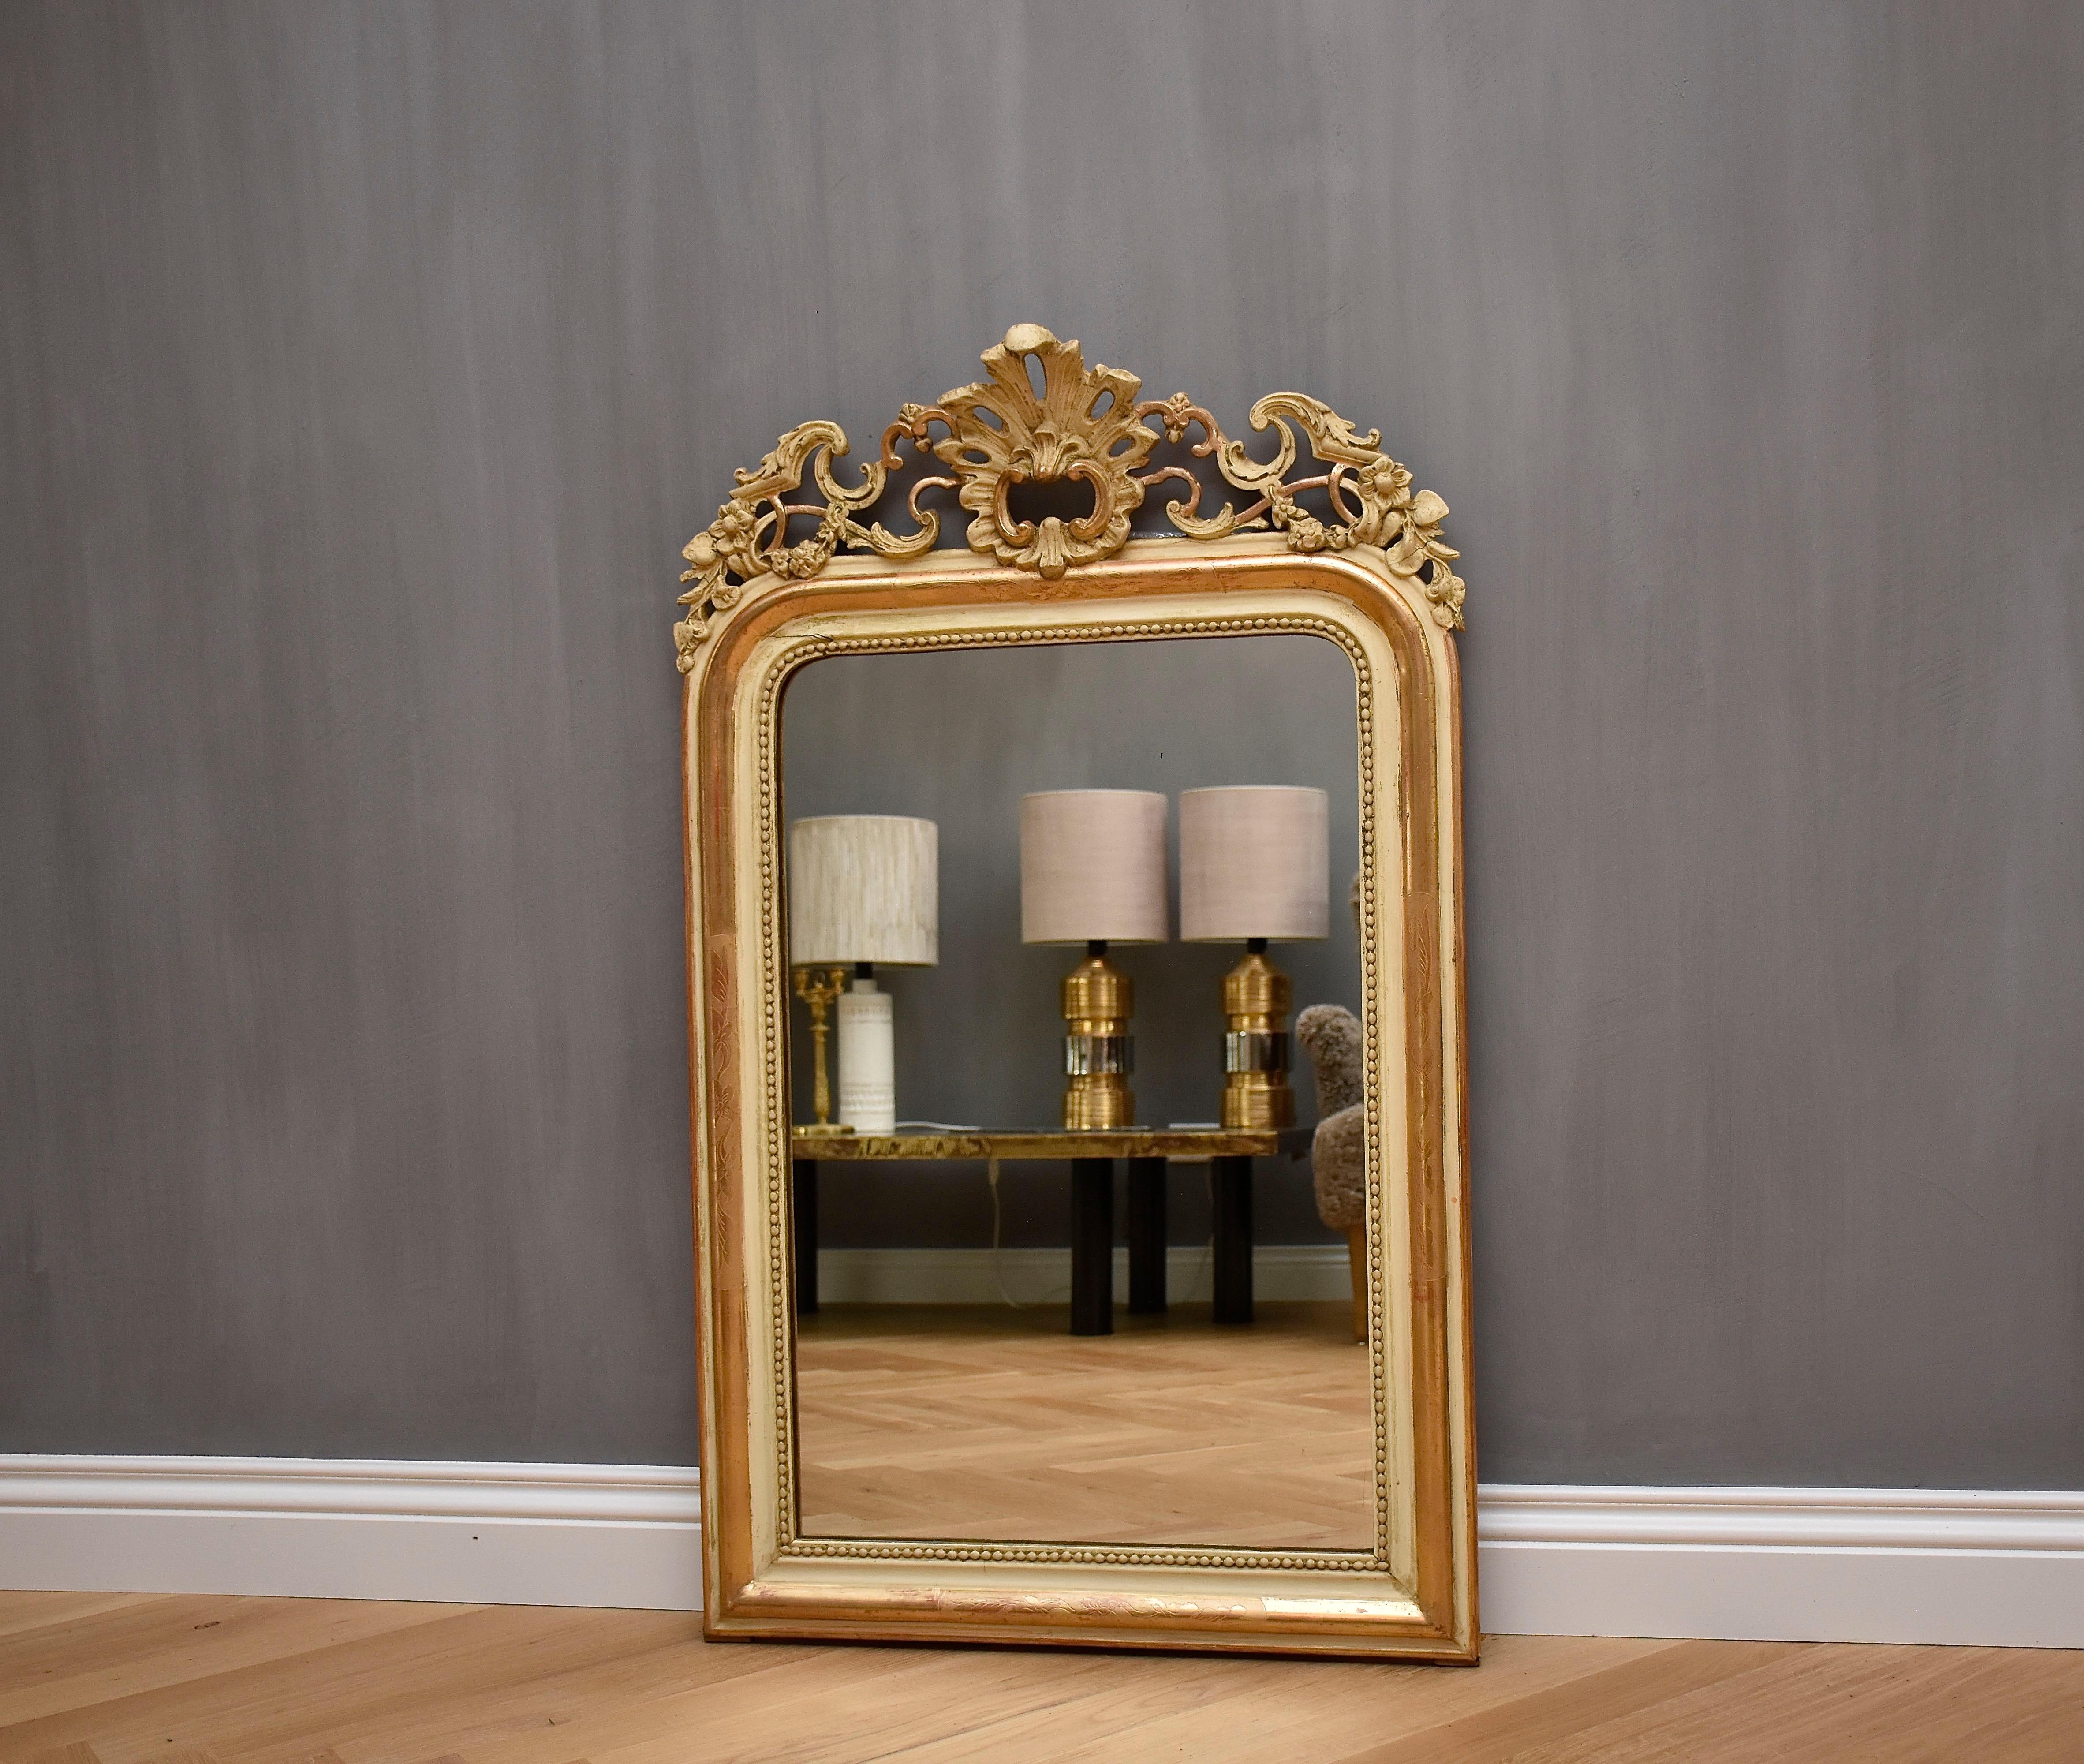 Beautiful antique French mirror with a fabulous crest and original slightly foxed glass.
The crest is decorated with floral decoration and C-scrolls.
The colour of the frame is off-white, gilded with a gold-leaf and has a beaded edge.
Place of